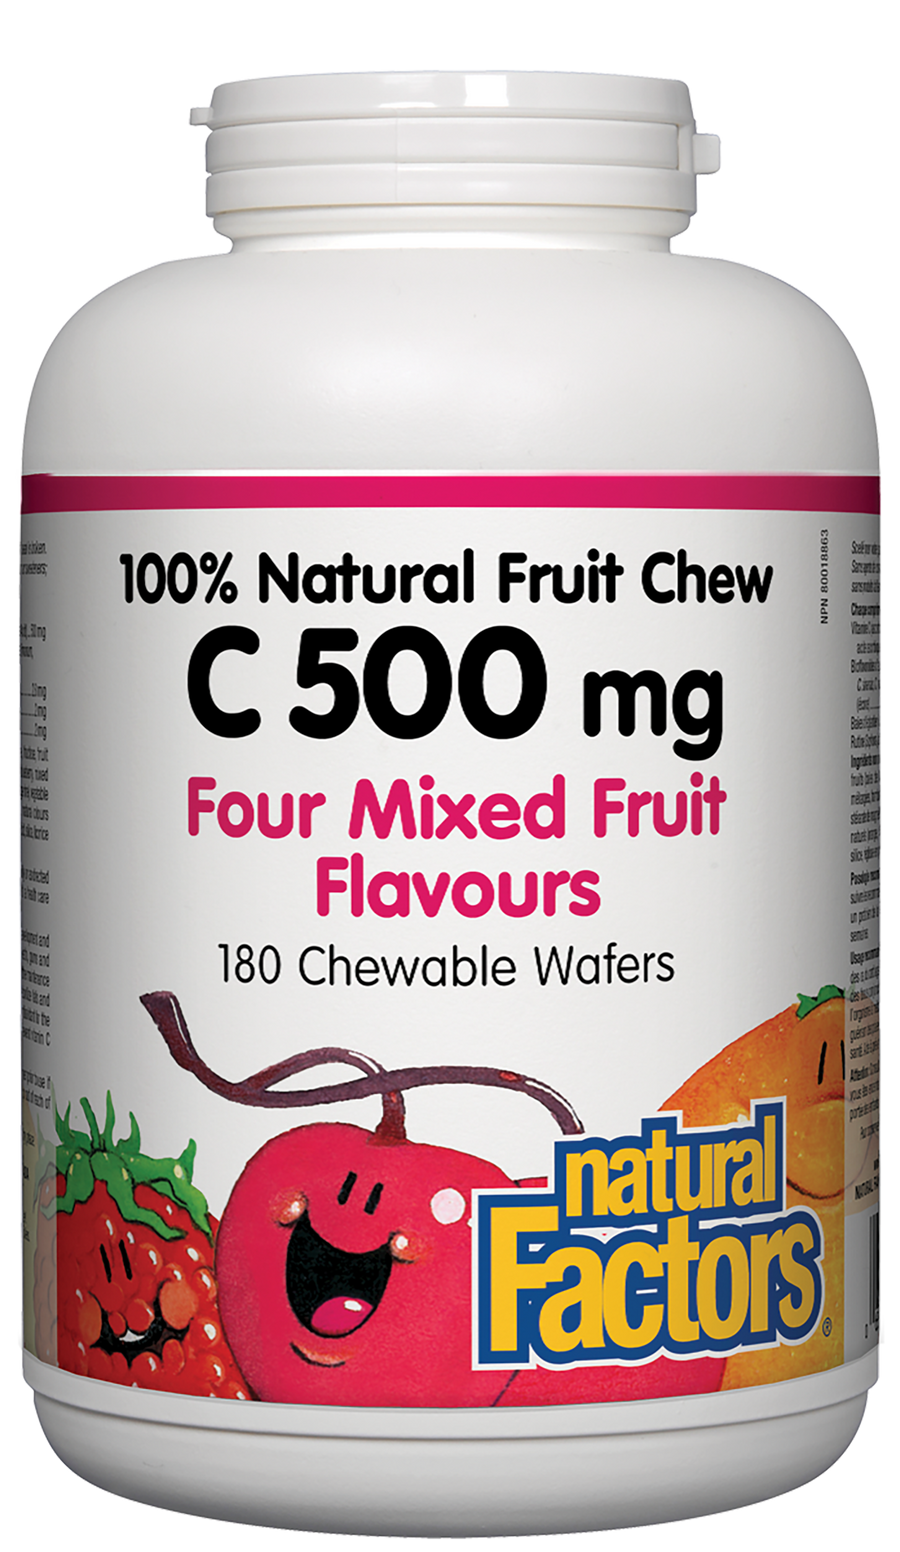 Natural Factors C 500 mg Four Mixed Fruit Flavours 180 Chewable Wafers